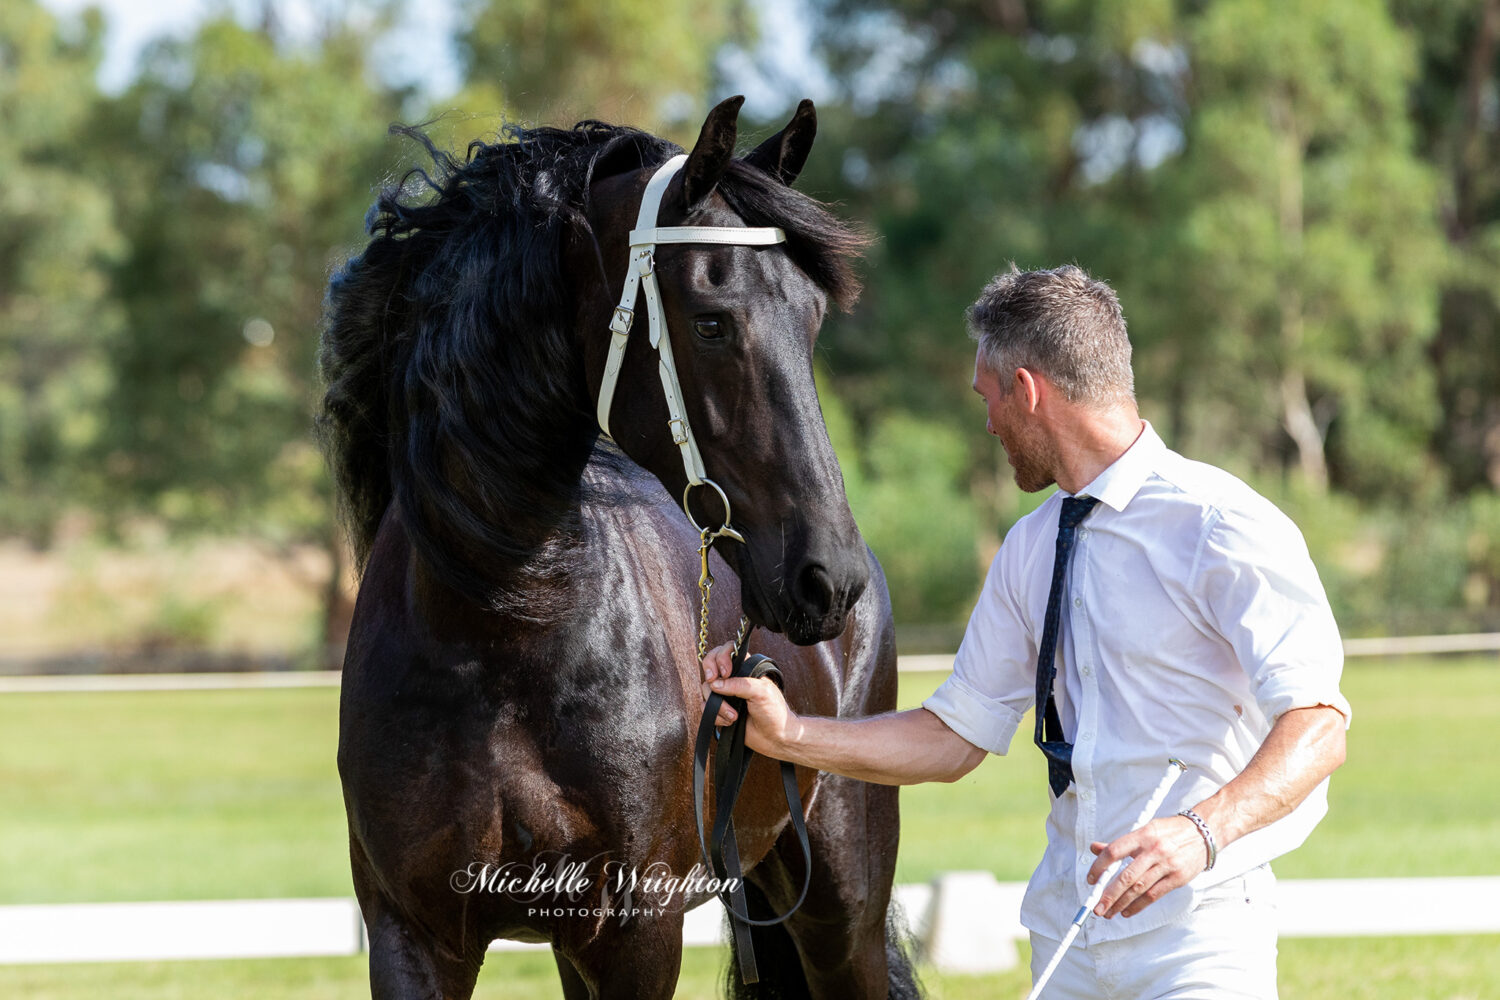 Friesian mare So Special KP at the WA 2019 Keuring